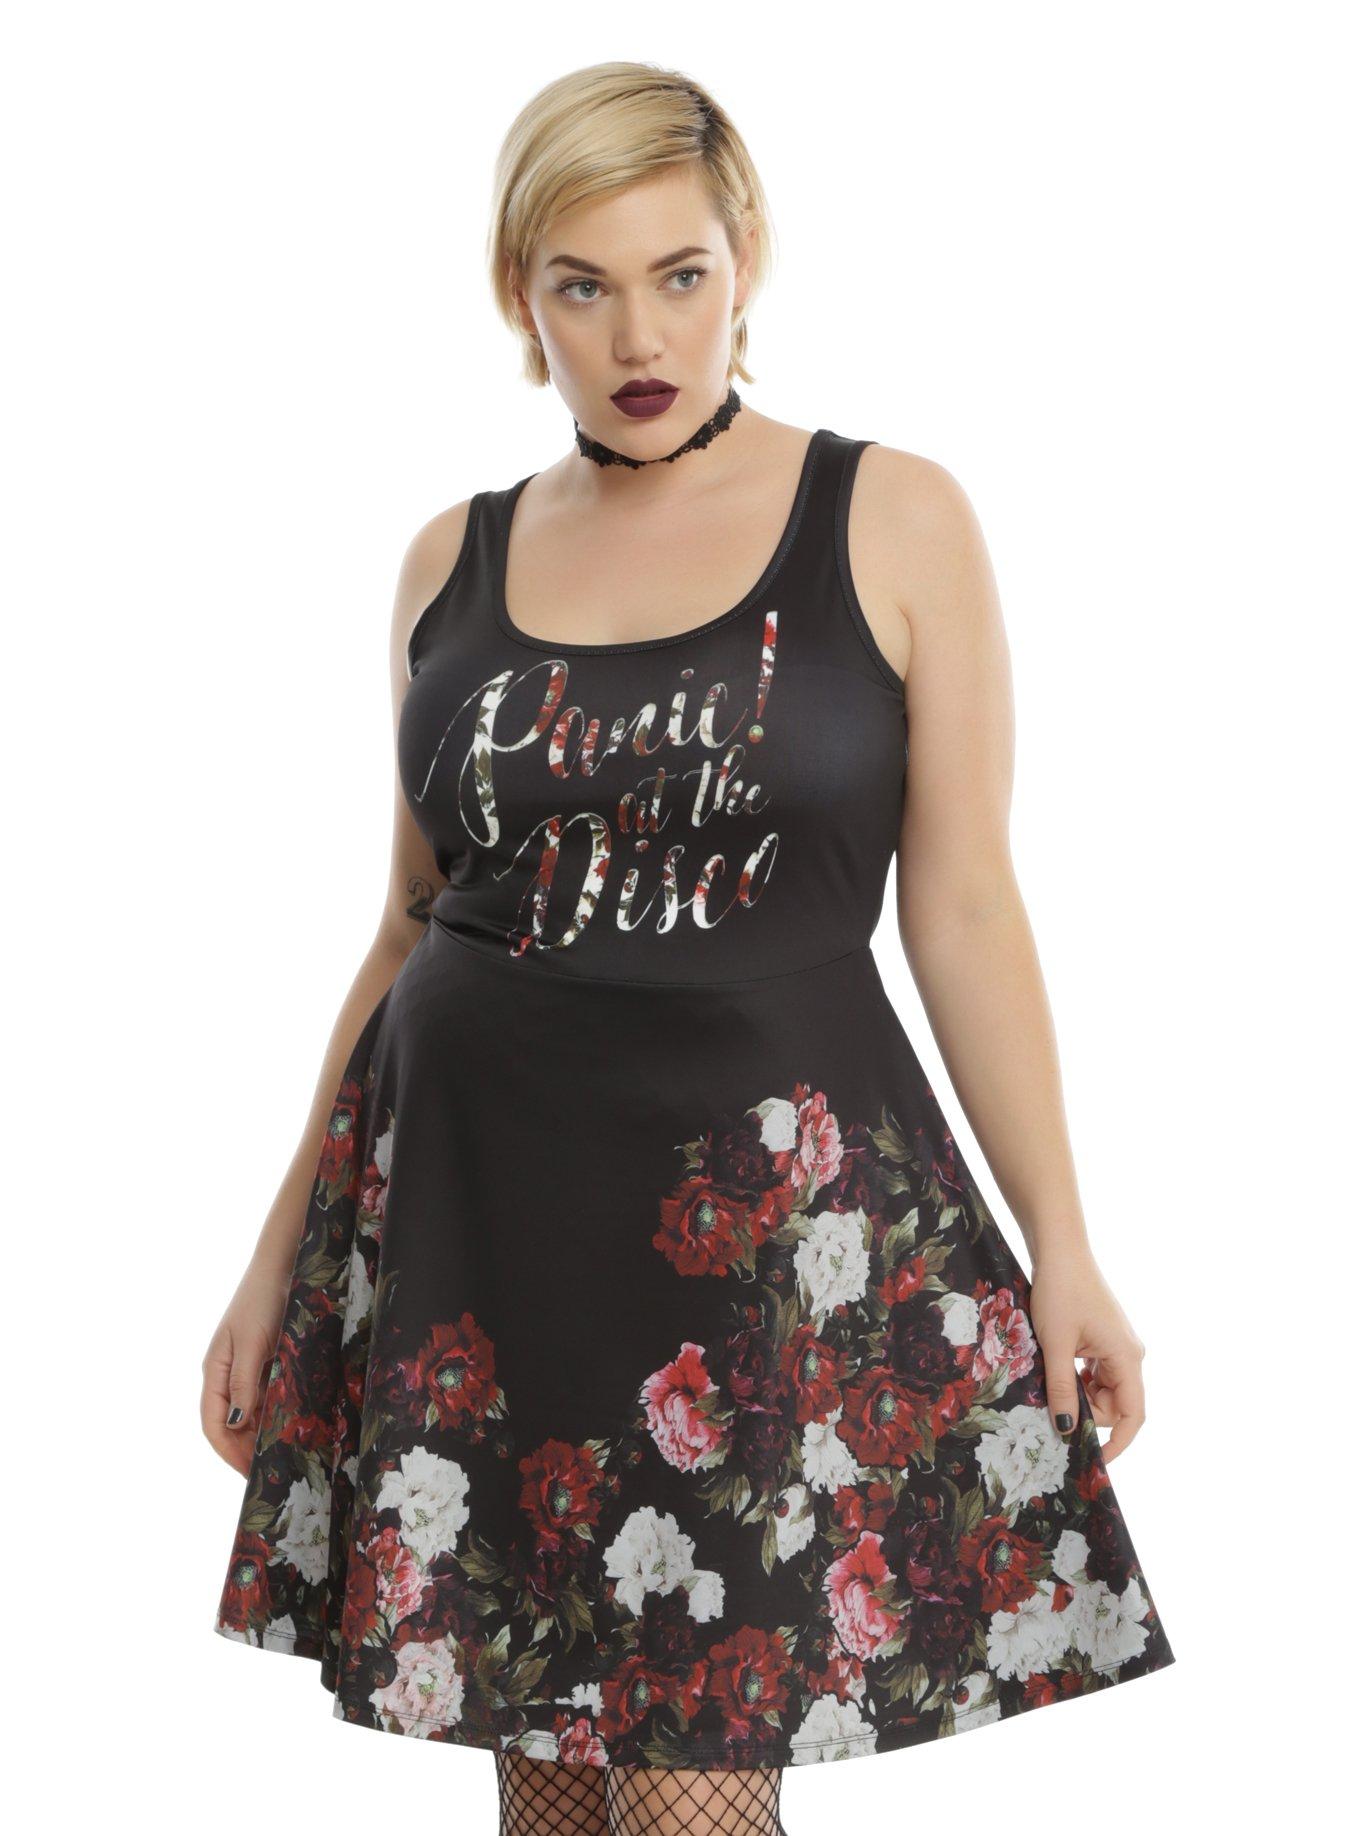 Panic! At The Disco Floral Dress Plus Size | Hot Topic